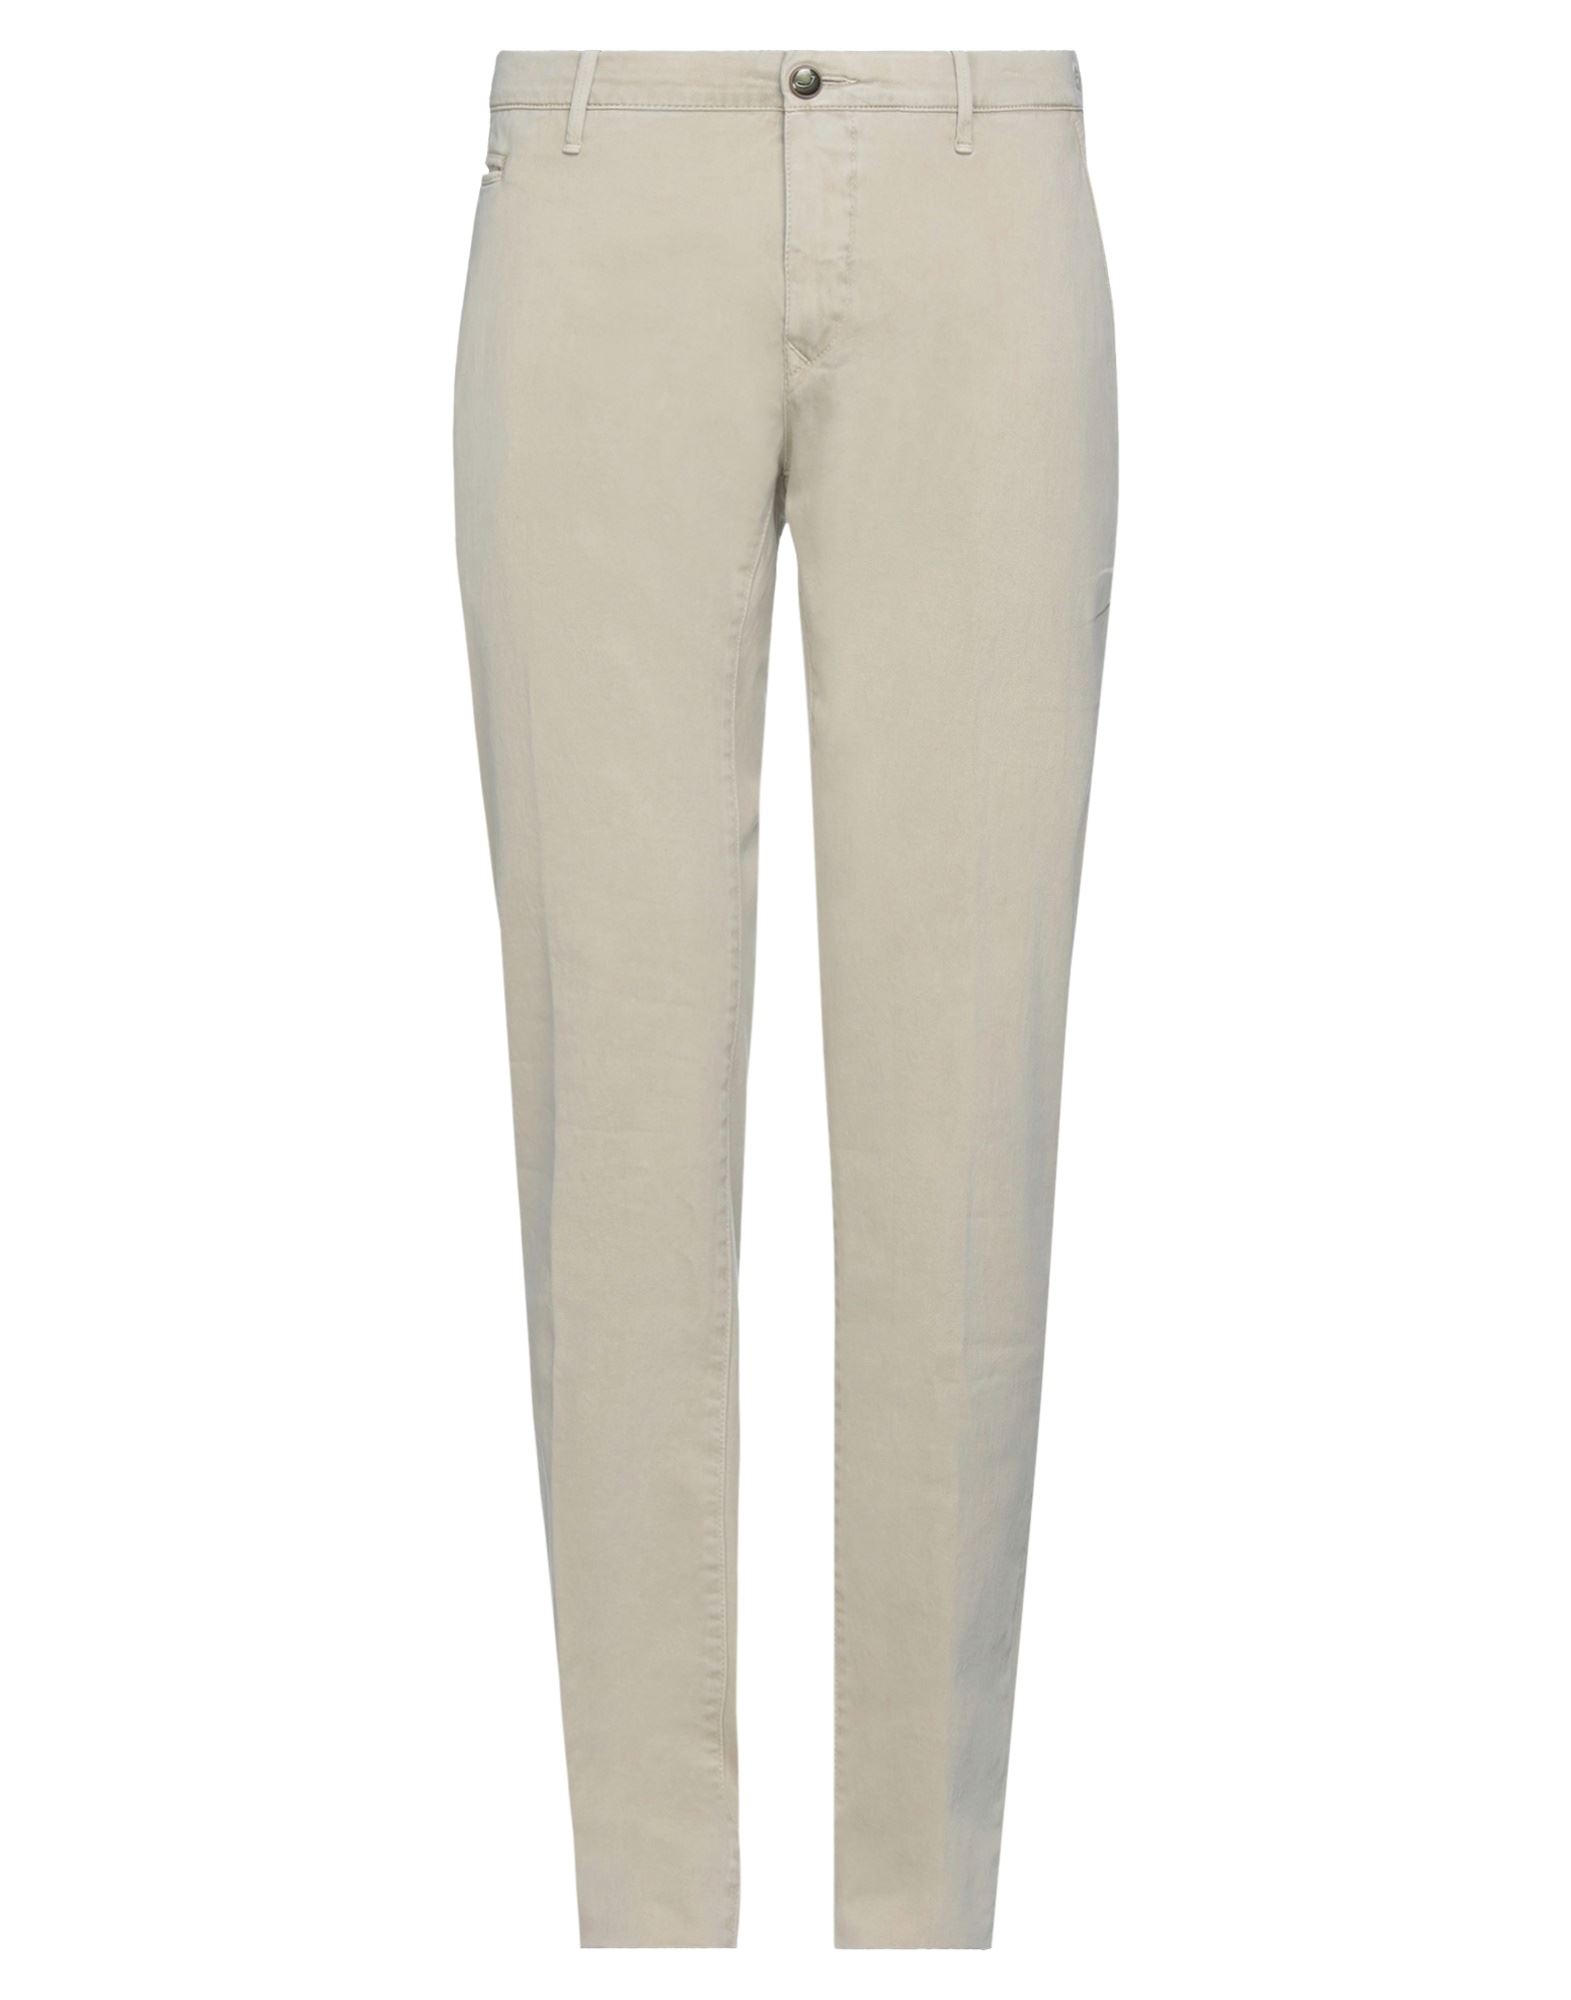 Jacob Cohёn Academy Pants In Sand